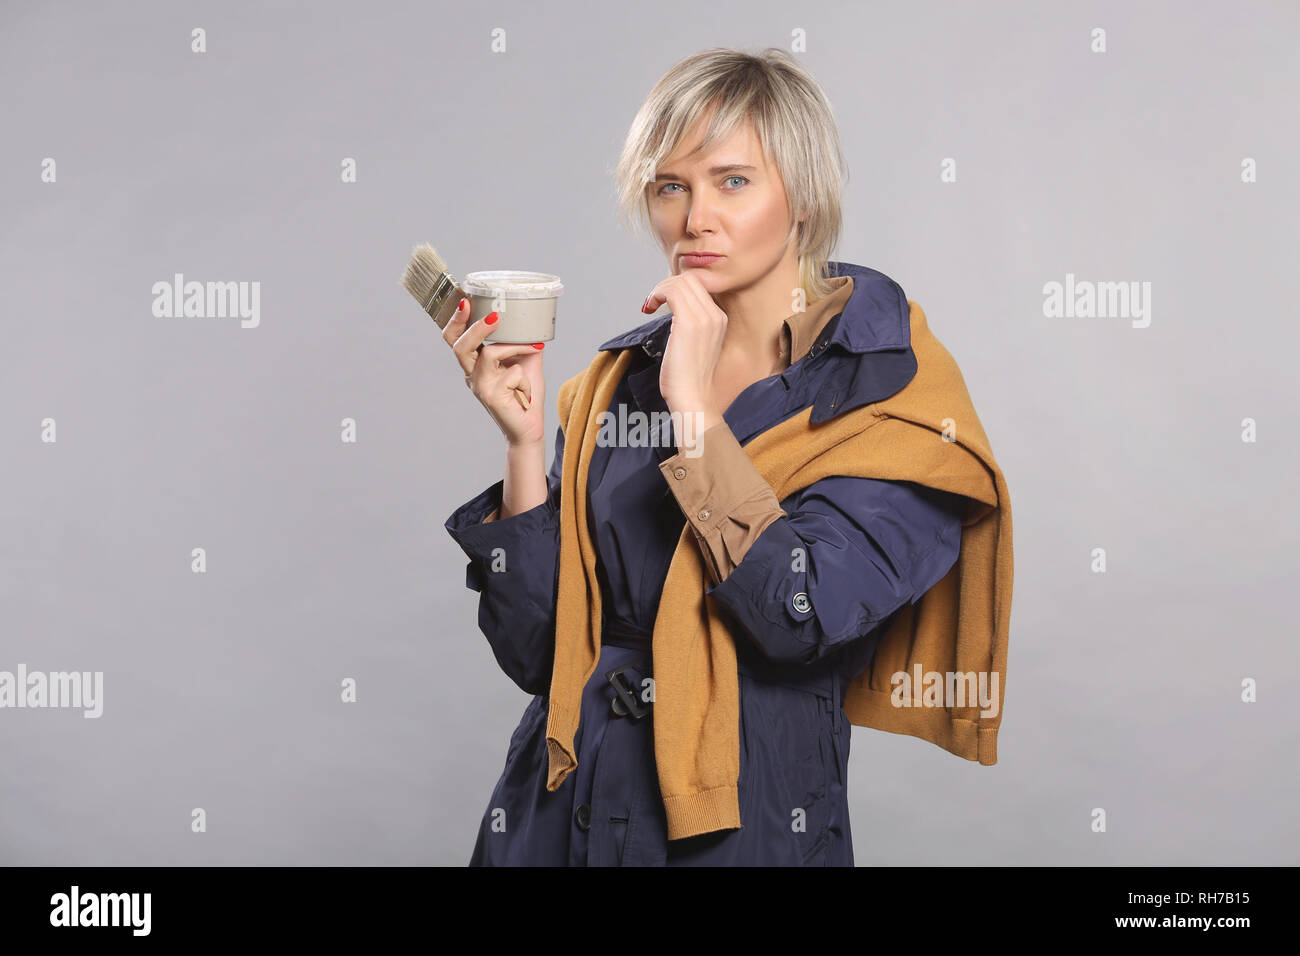 woman Painter, an artist, in a sweater and robe, holding a brush and gray paint, he thinks to paint, 40th, on isolated background Stock Photo